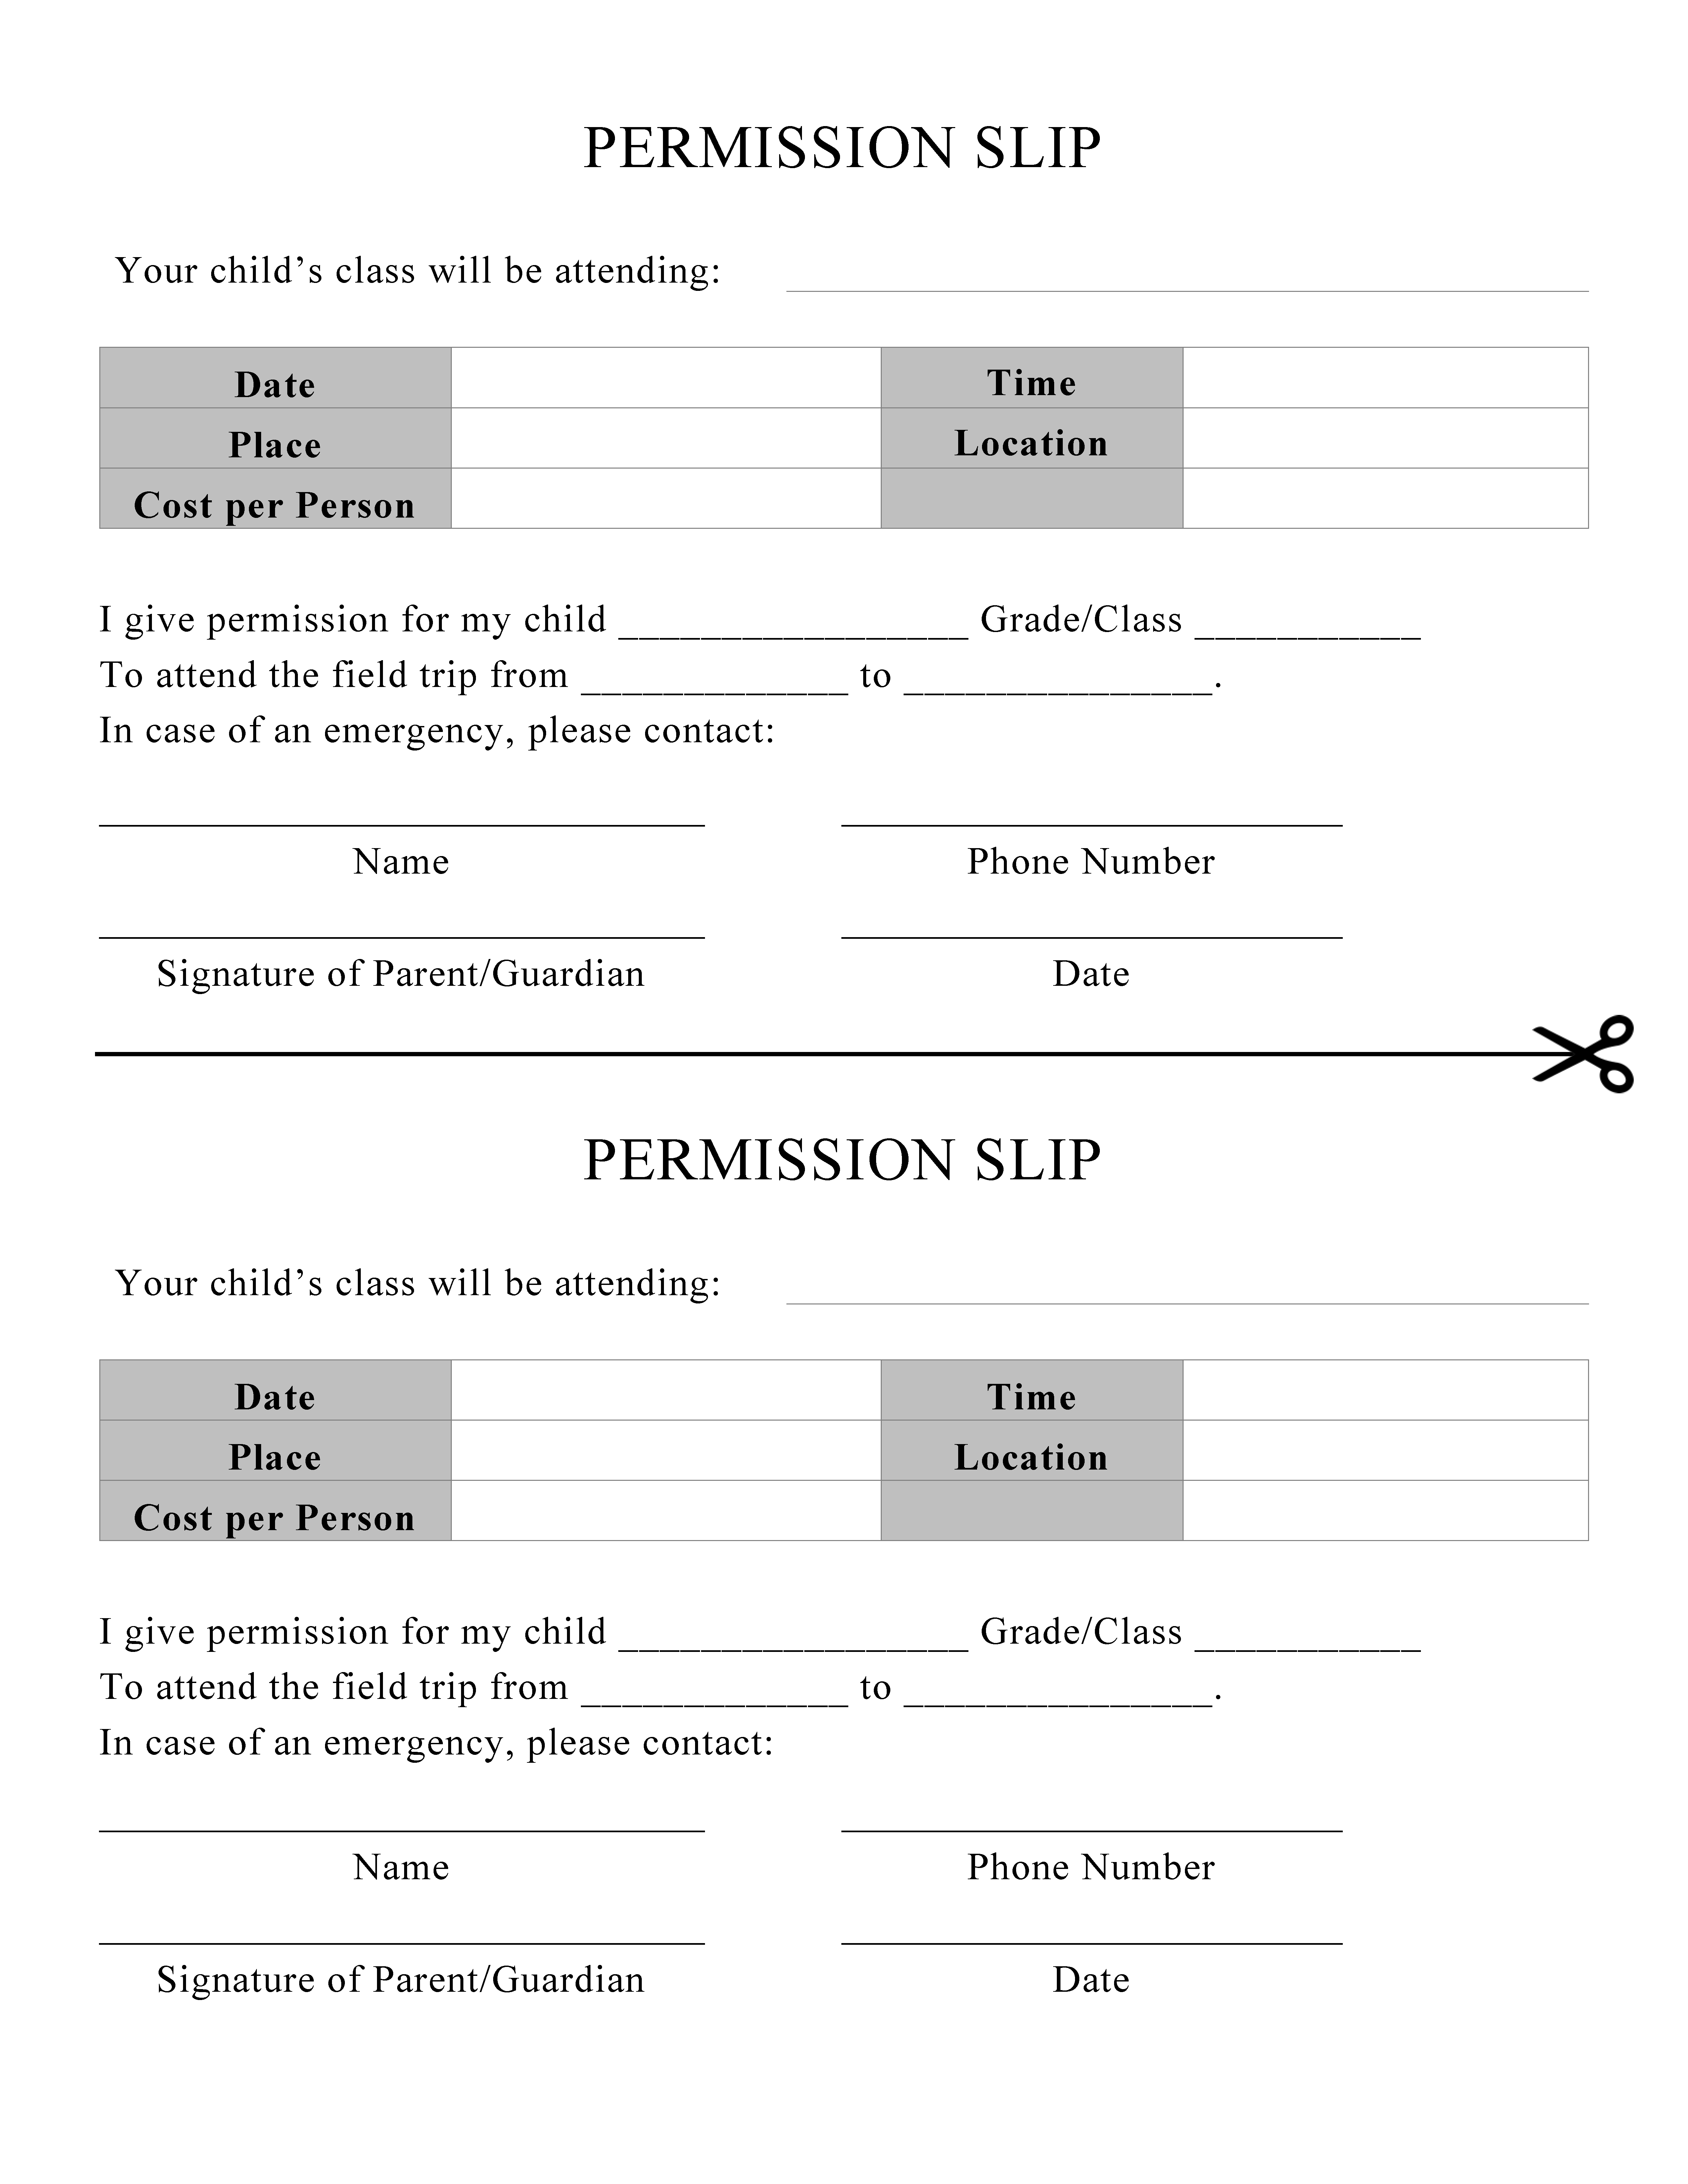 free-editable-permission-slip-template-instant-download